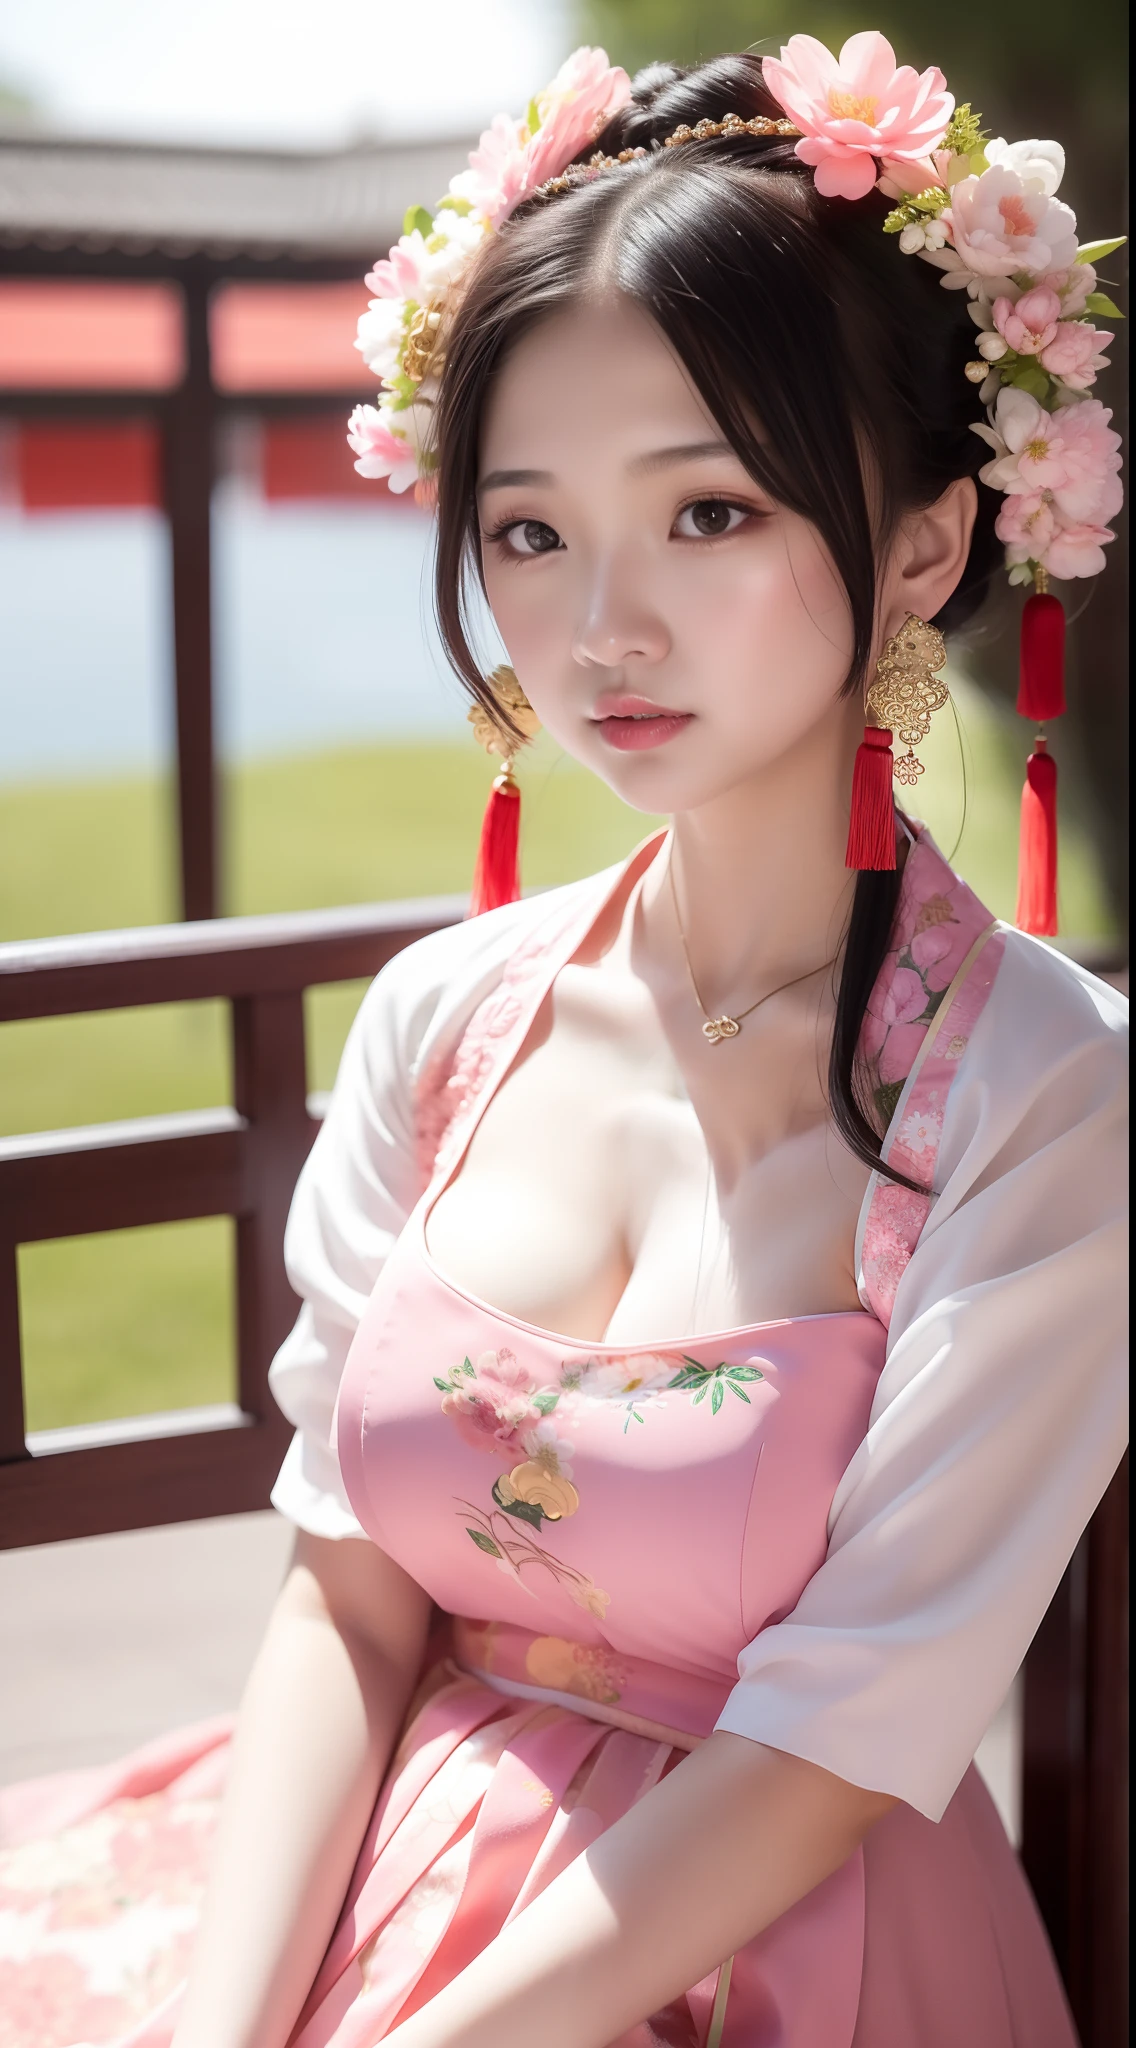 Close-up of a young girl in a pink dress and a green flower headdress, China Princess, Chinese girl, Palace ， A girl in Hanfu, Young Asian girl, Princesa chinesa antiga, Cute young girl, Chinese style, young girl, cute beautiful, Beautiful character painting, beautiful portrait image, Very beautiful girl, Asian girl, Chinese traditional, Chinese costume，Huge breasts，Big 